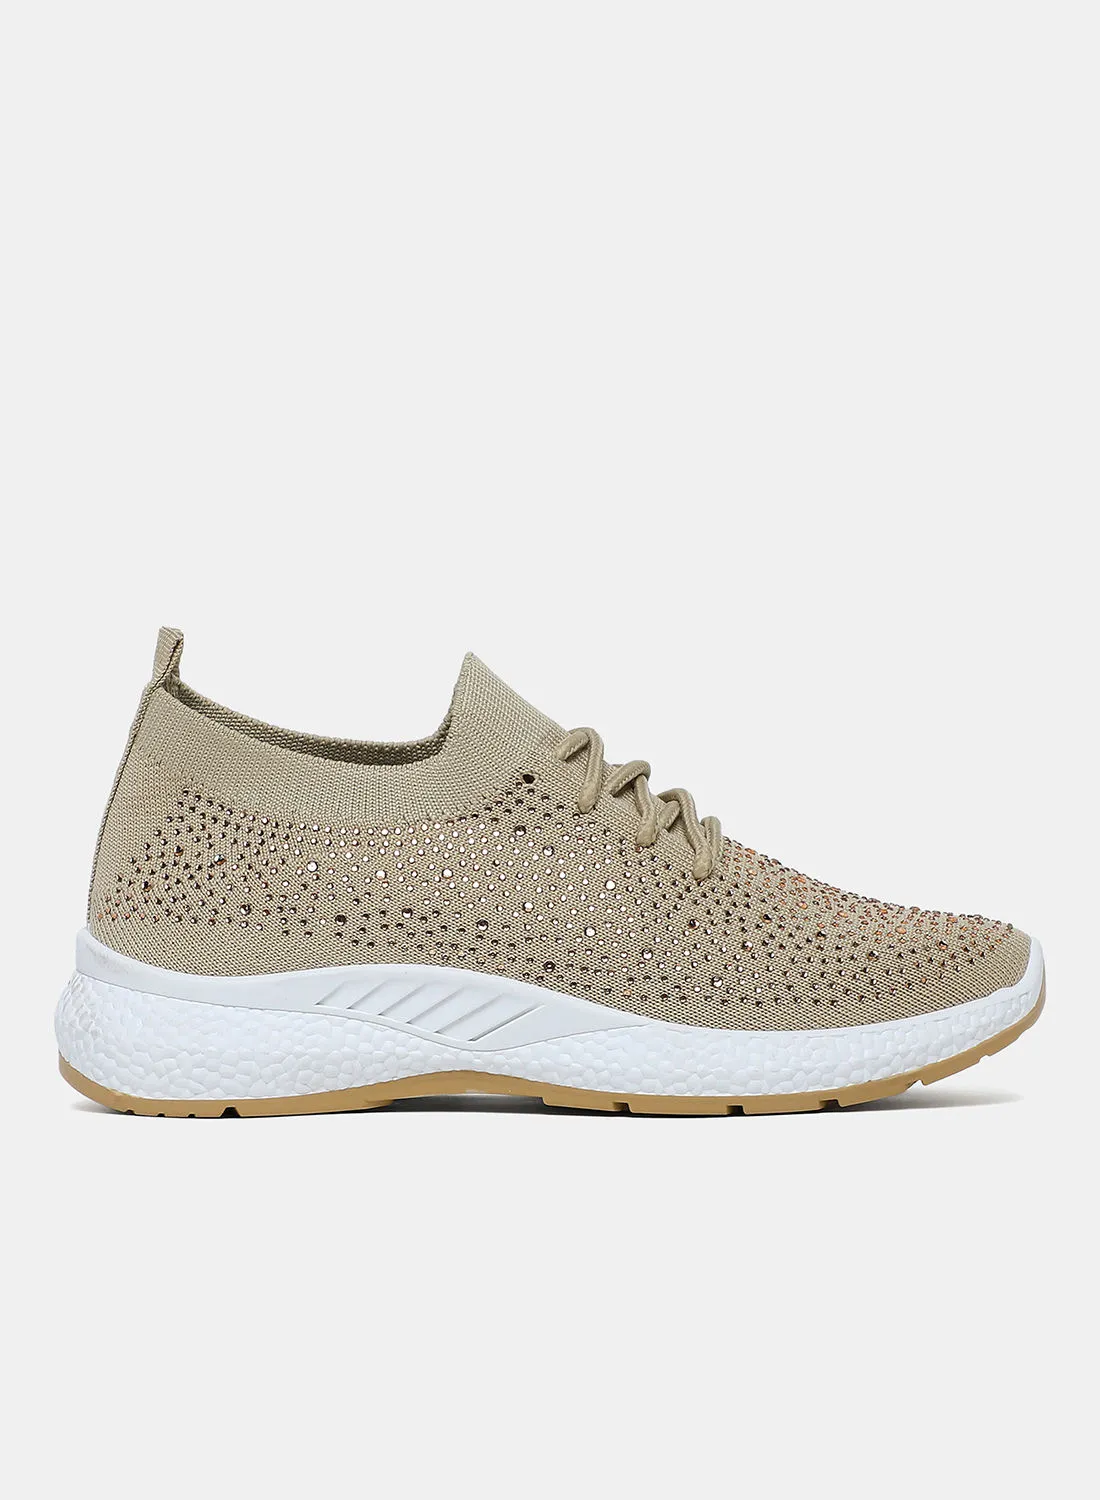 Athletiq Casual Low Top Sneakers Beige